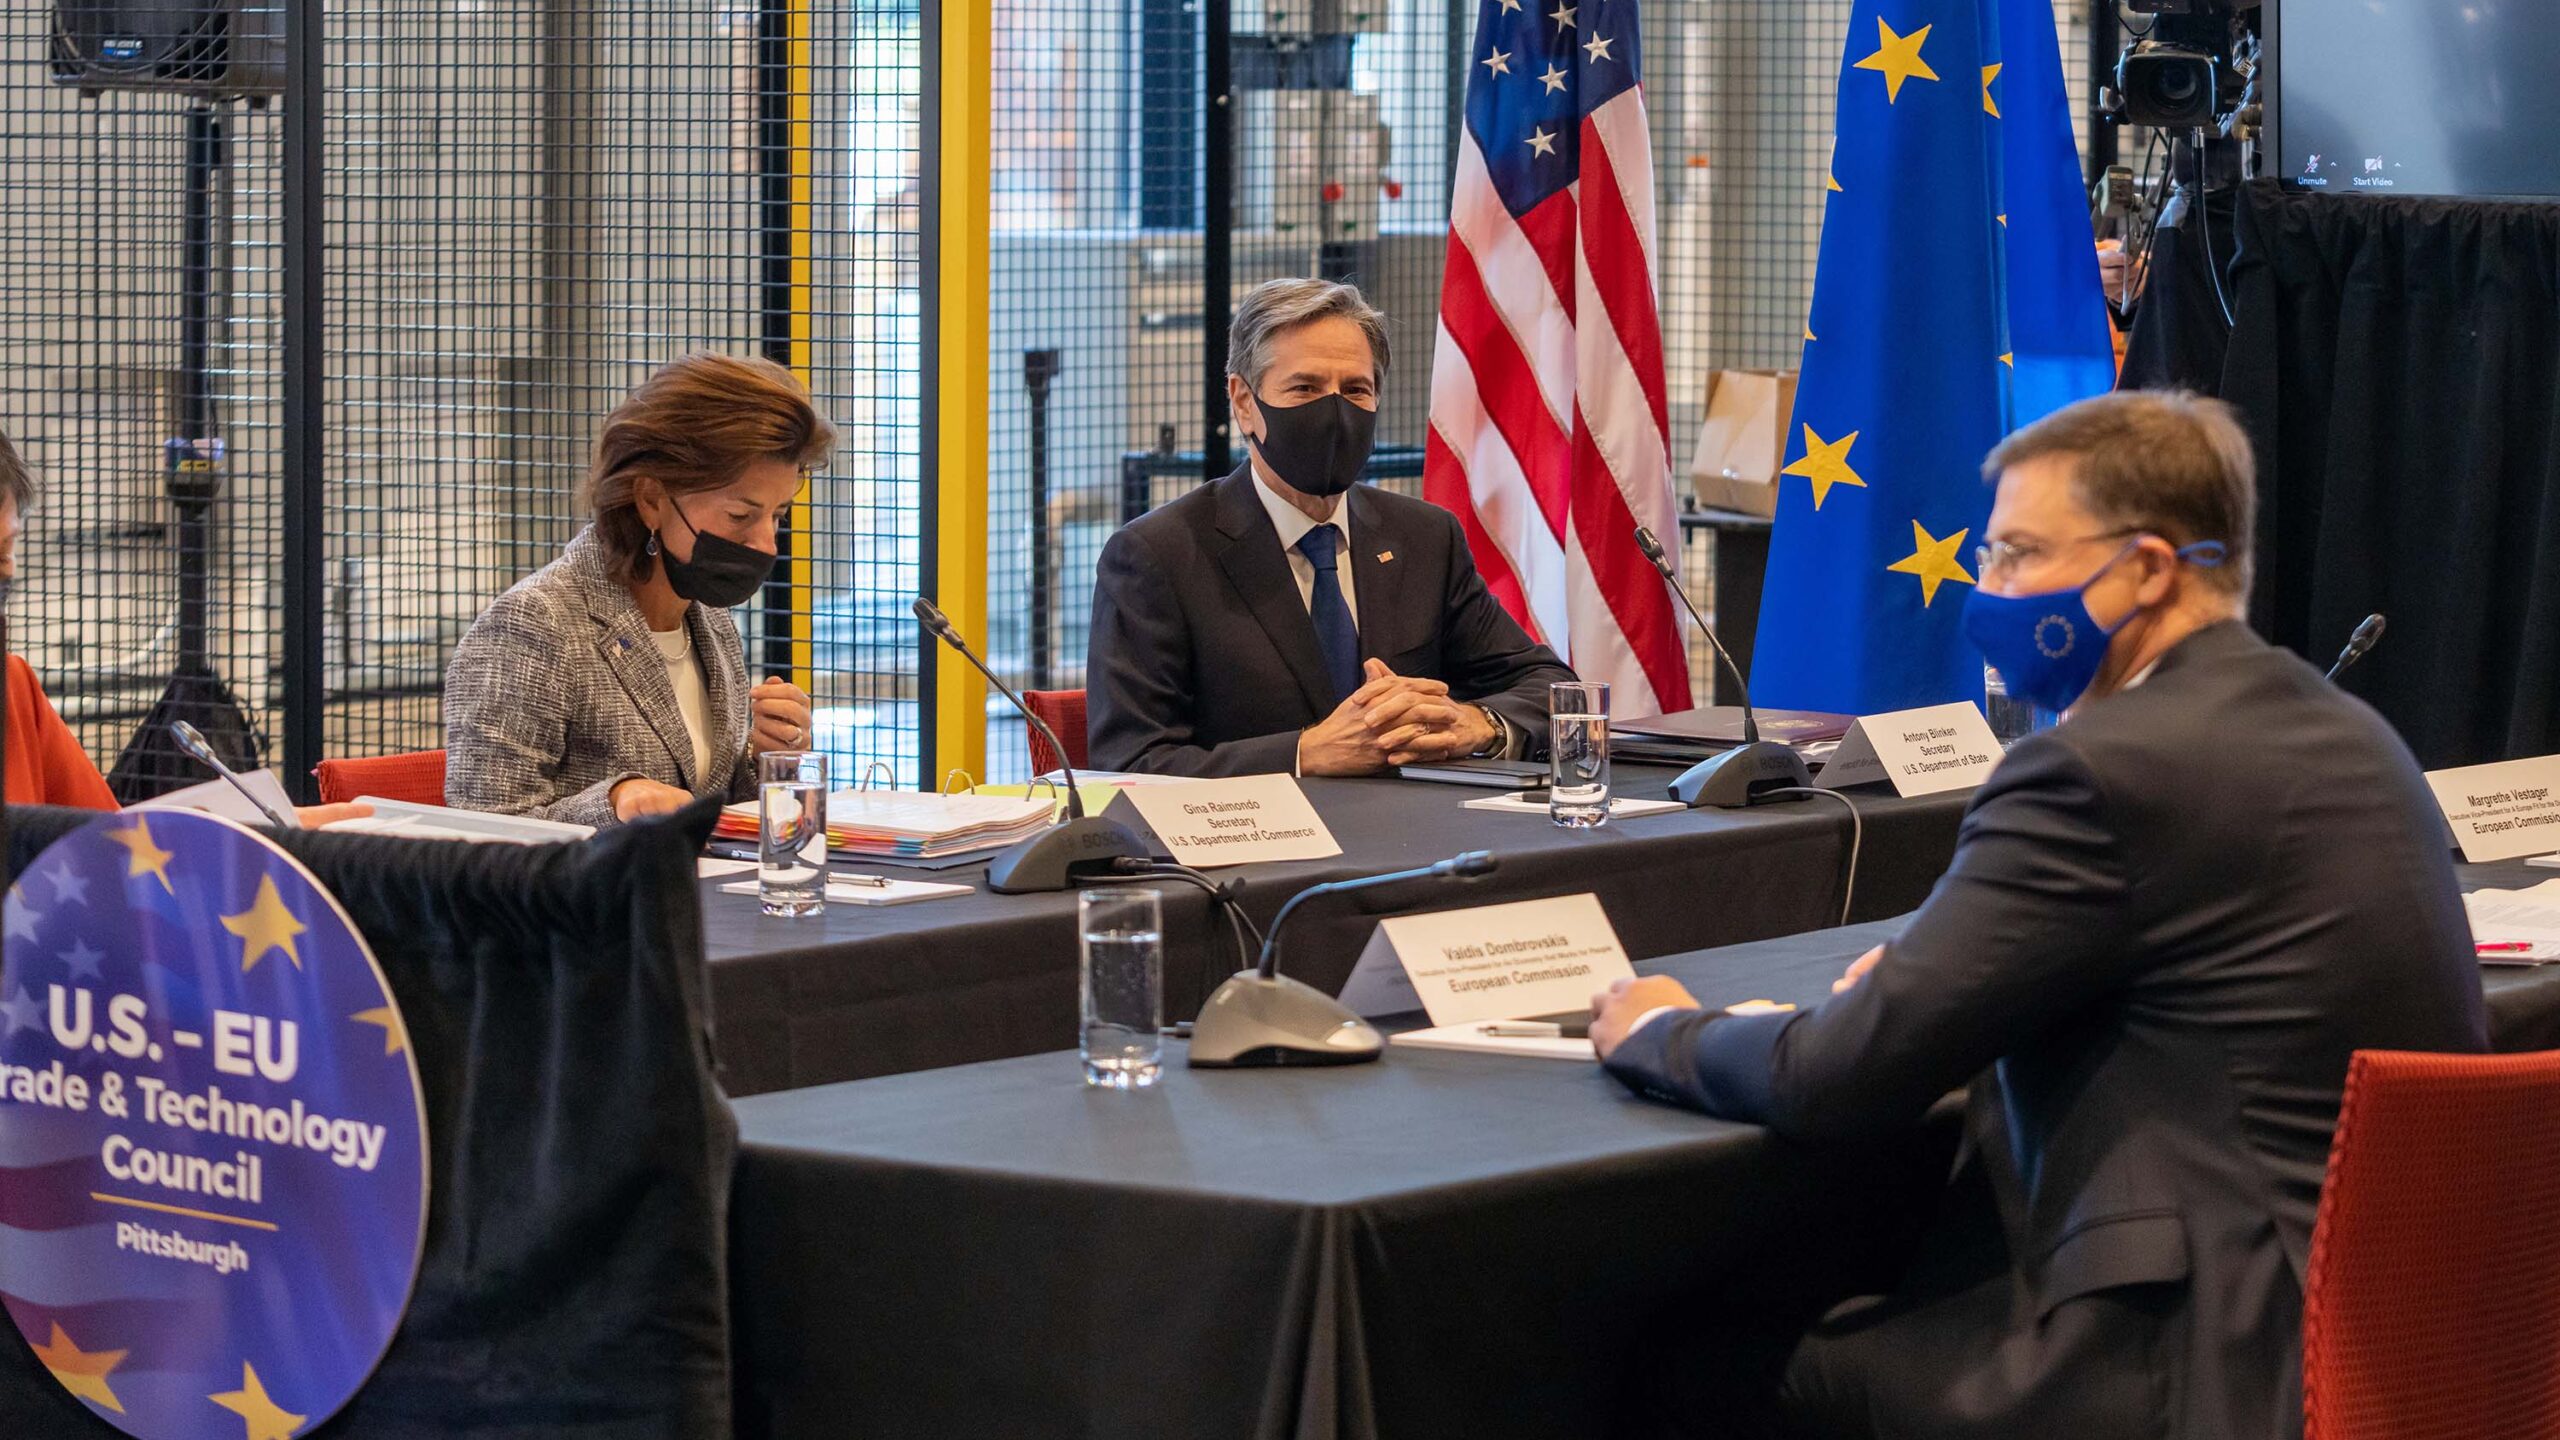 U.S. and EU leaders seated socially distanced at opposing tables